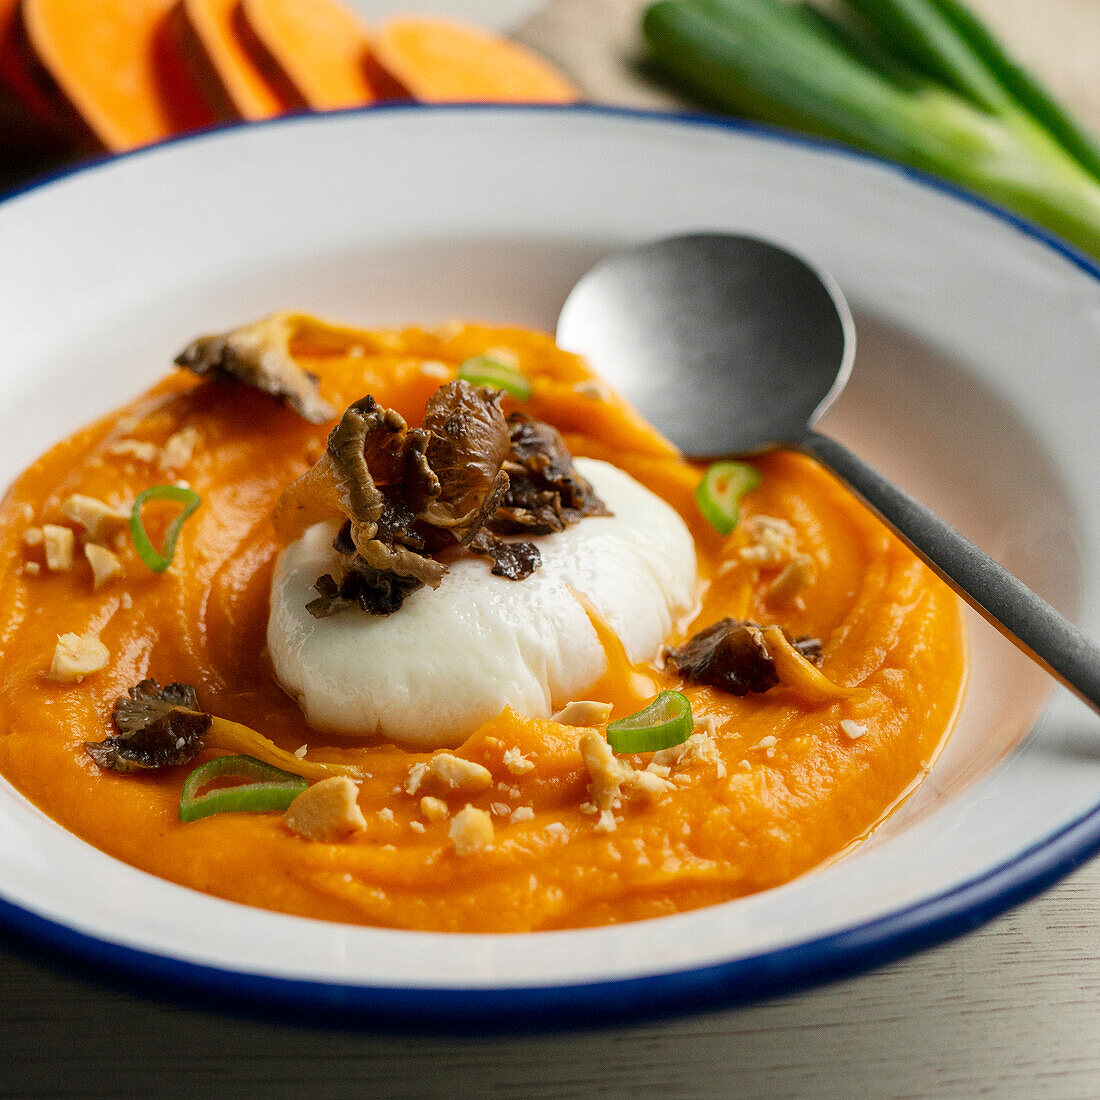 Sweet potato cream with mushrooms and poached egg